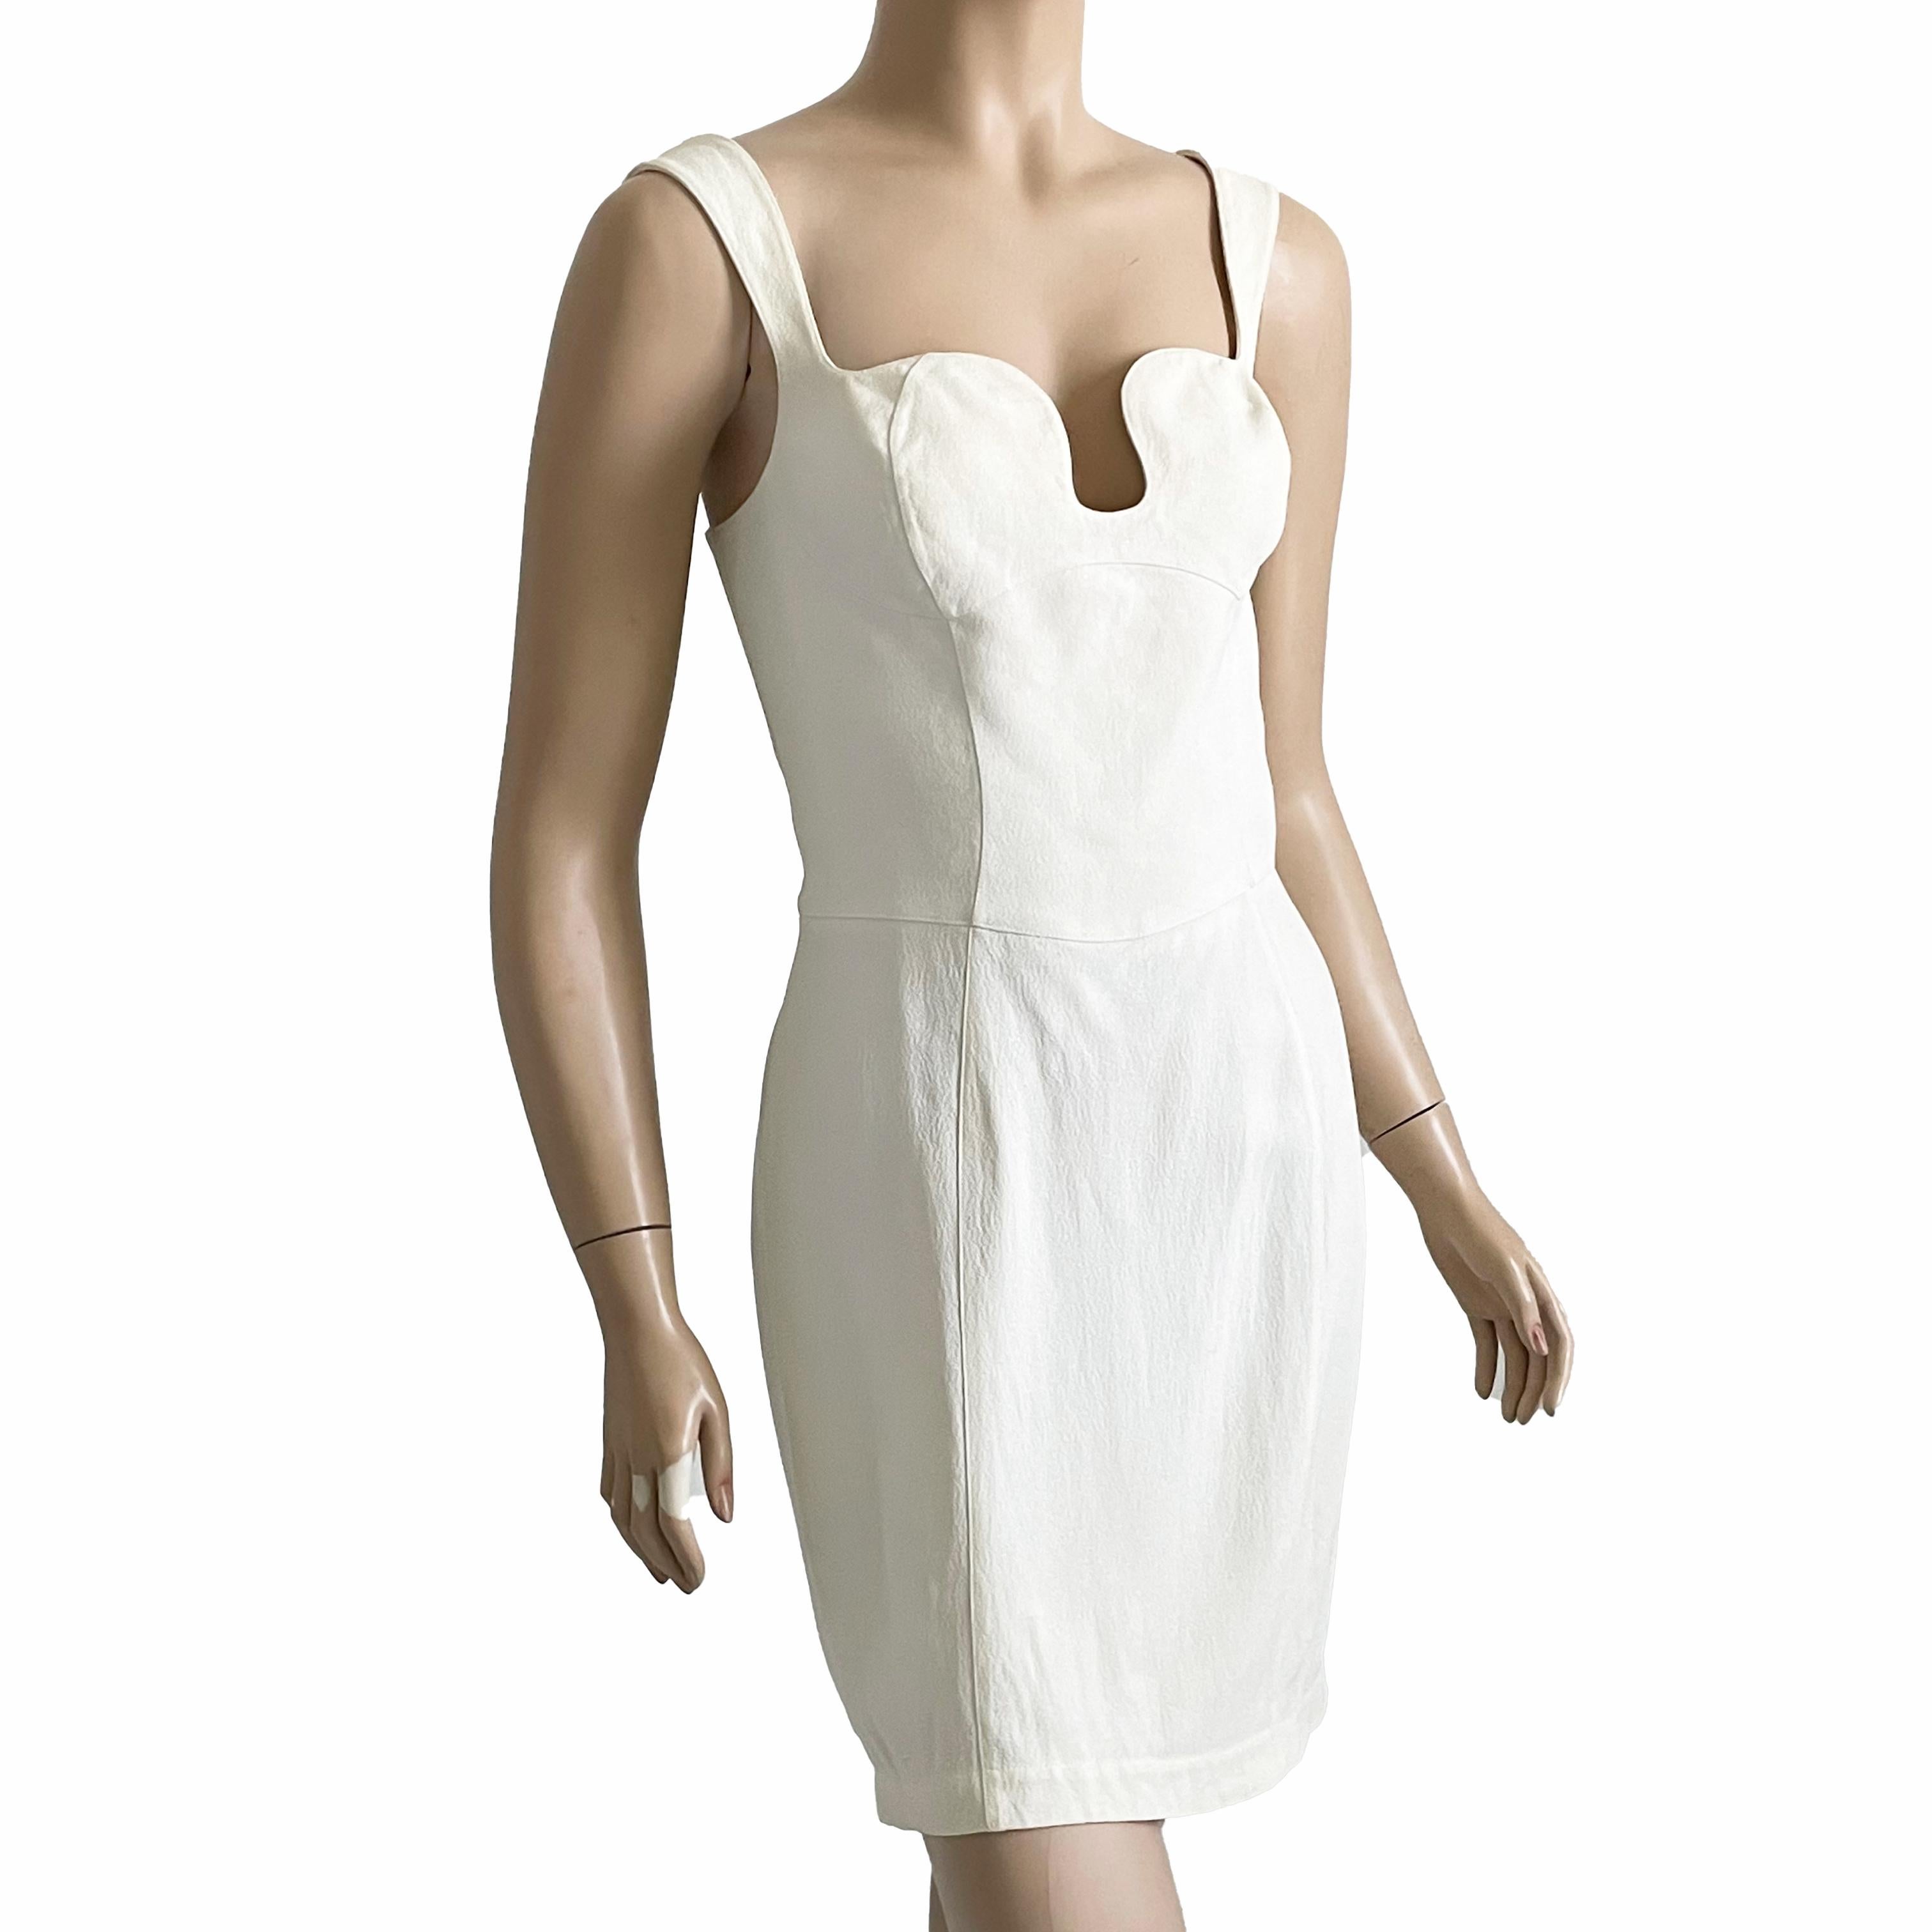 Thierry Mugler Cocktail Dress White Crepe Sculptural Chic Vintage 90s Sz 40 HTF For Sale 1